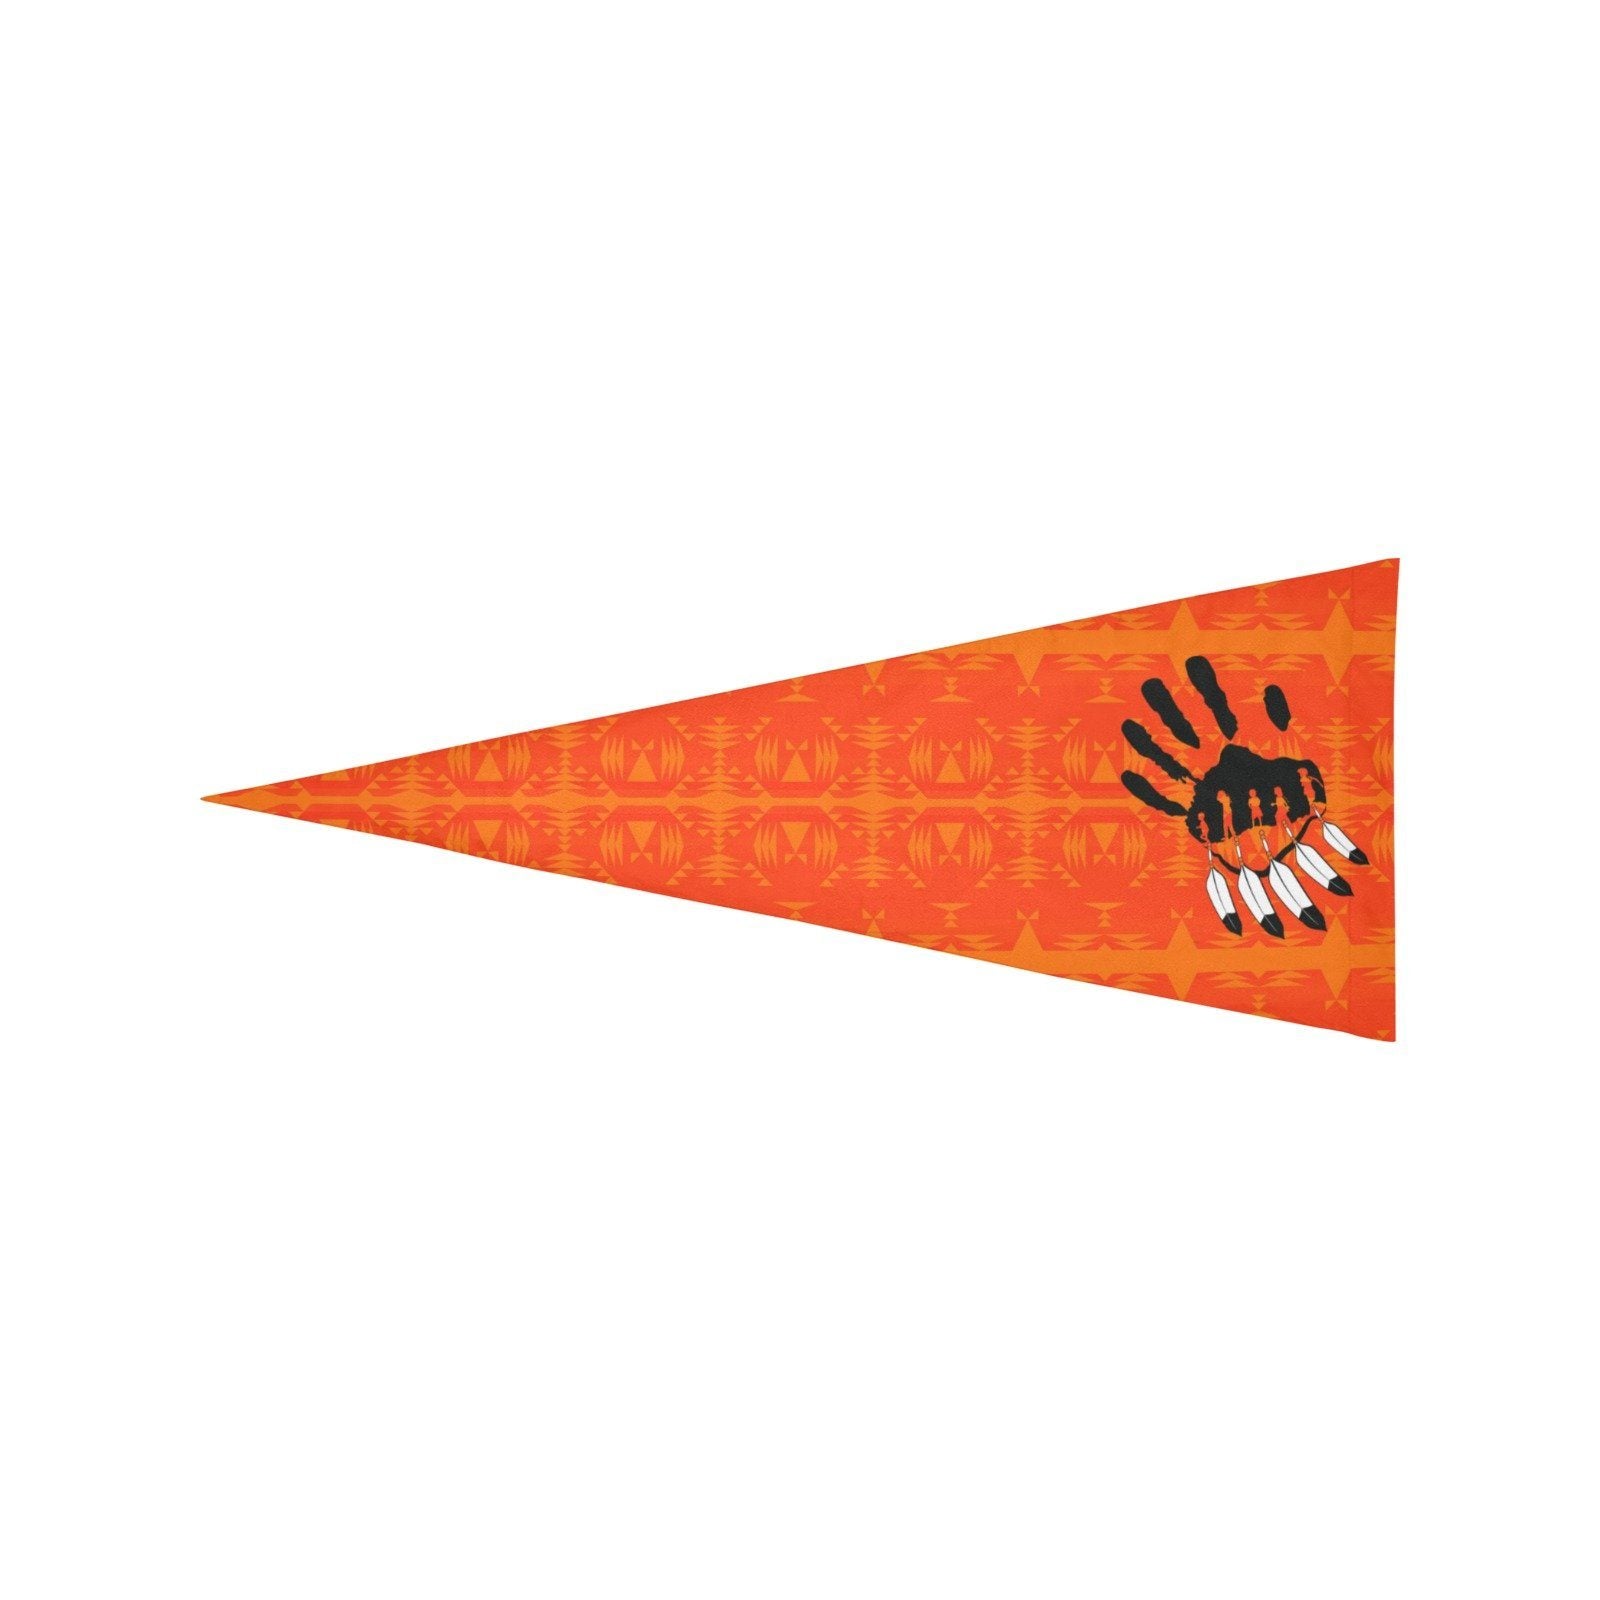 Between the Mountains Orange A feather for each Trigonal Garden Flag 30"x12" Trigonal Garden Flag 30"x12" e-joyer 